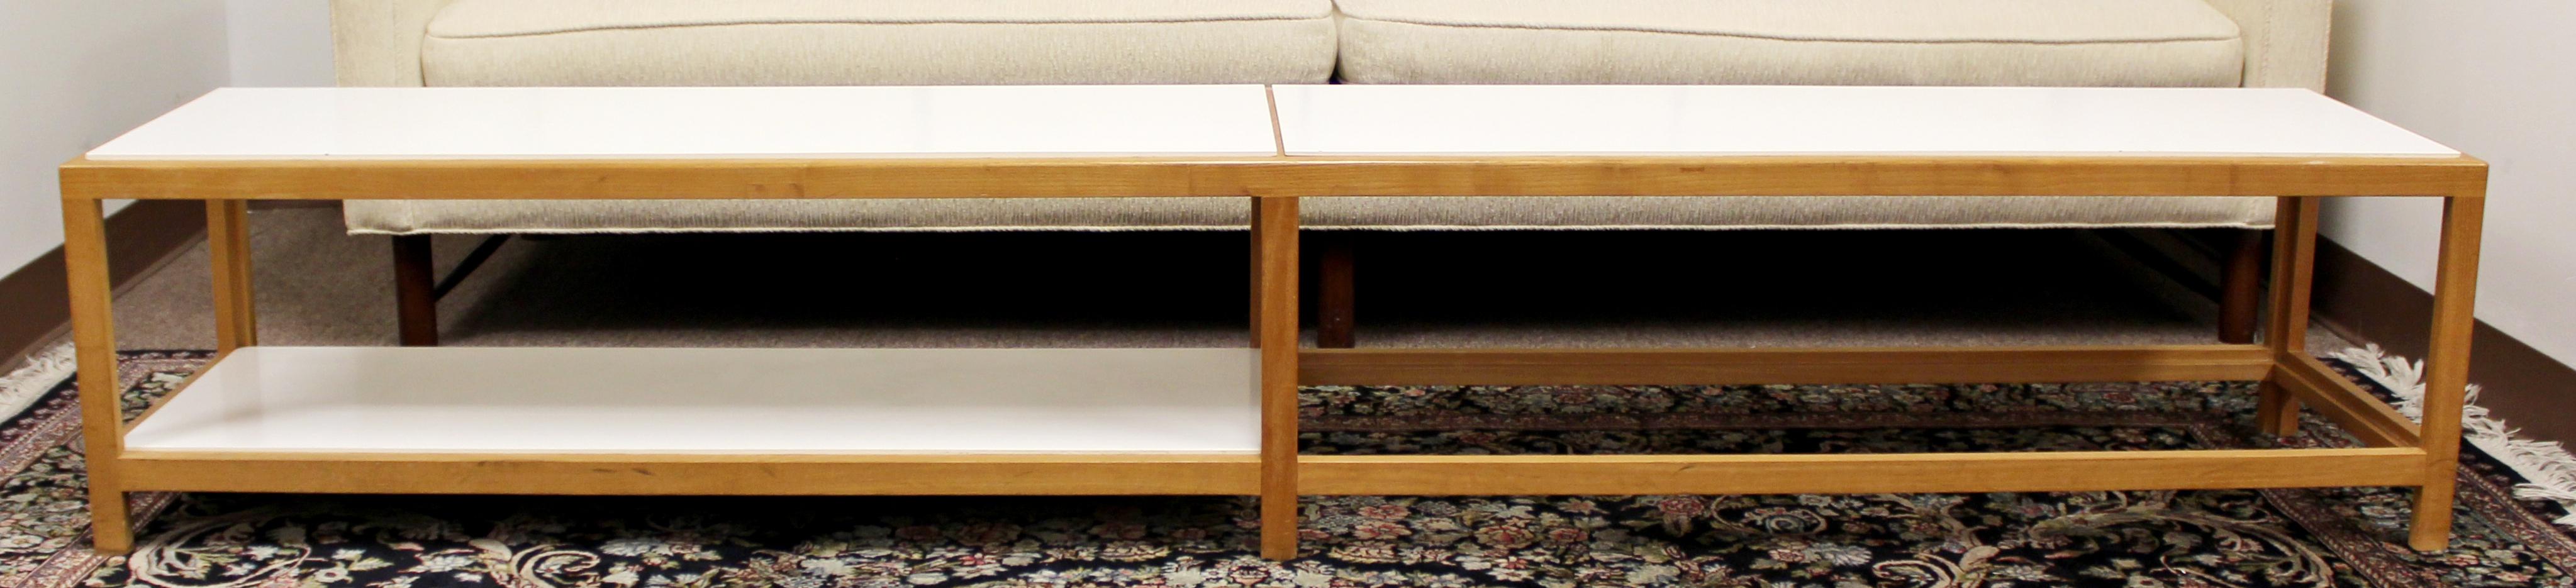 For your consideration is a rectangular coffee table bench, designed by Edward Wormley for Dunbar, model #5402, circa 1950s. In excellent vintage condition. The dimensions are 86